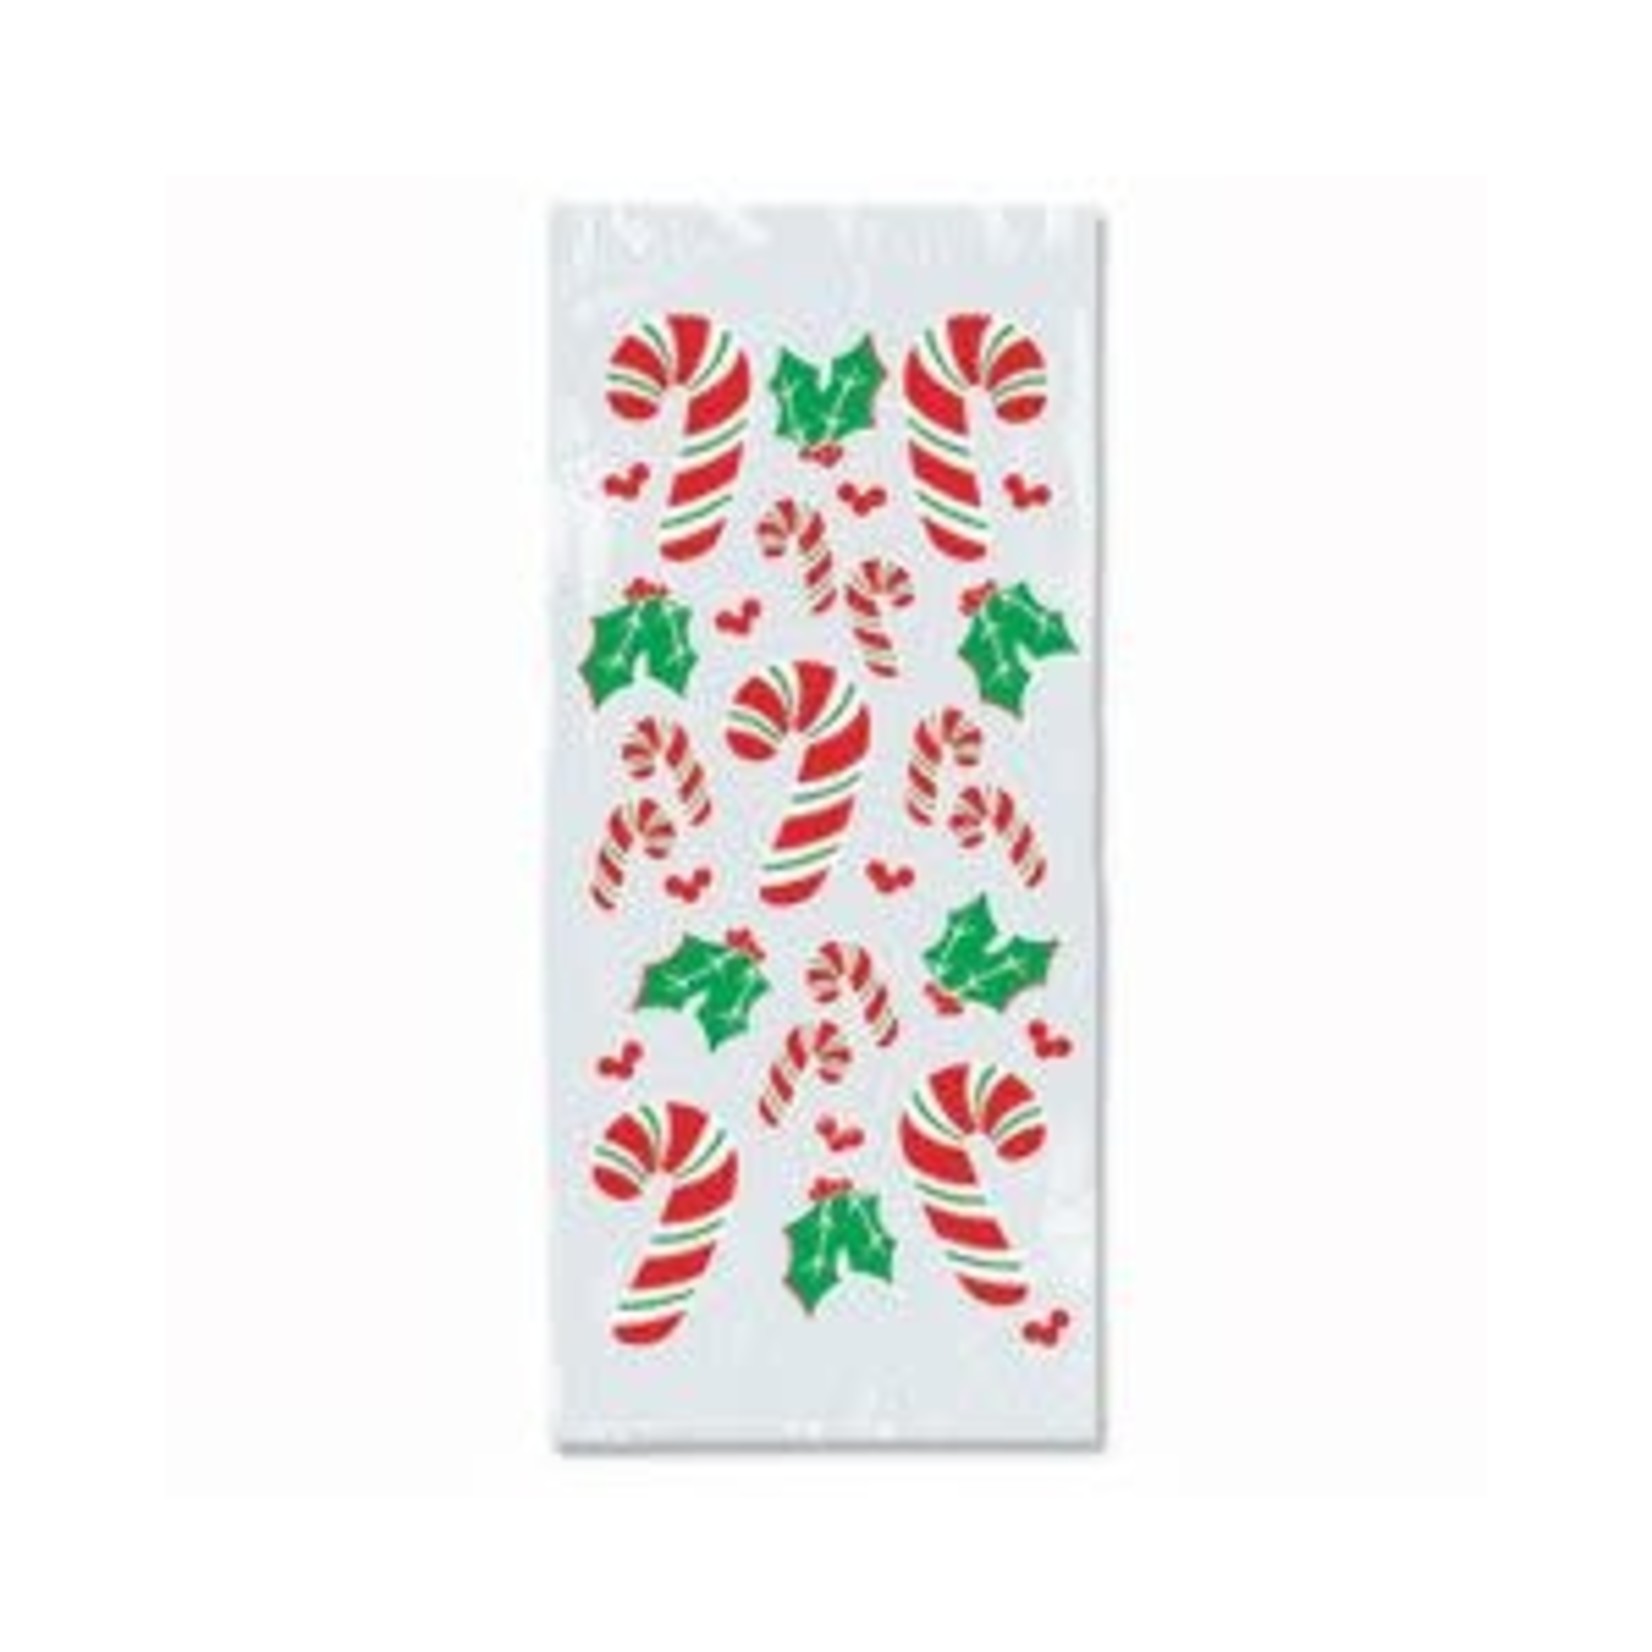 Beistle Candy Cane & Holly Cello Bags w/ Ties - 25ct. (4" x 9")